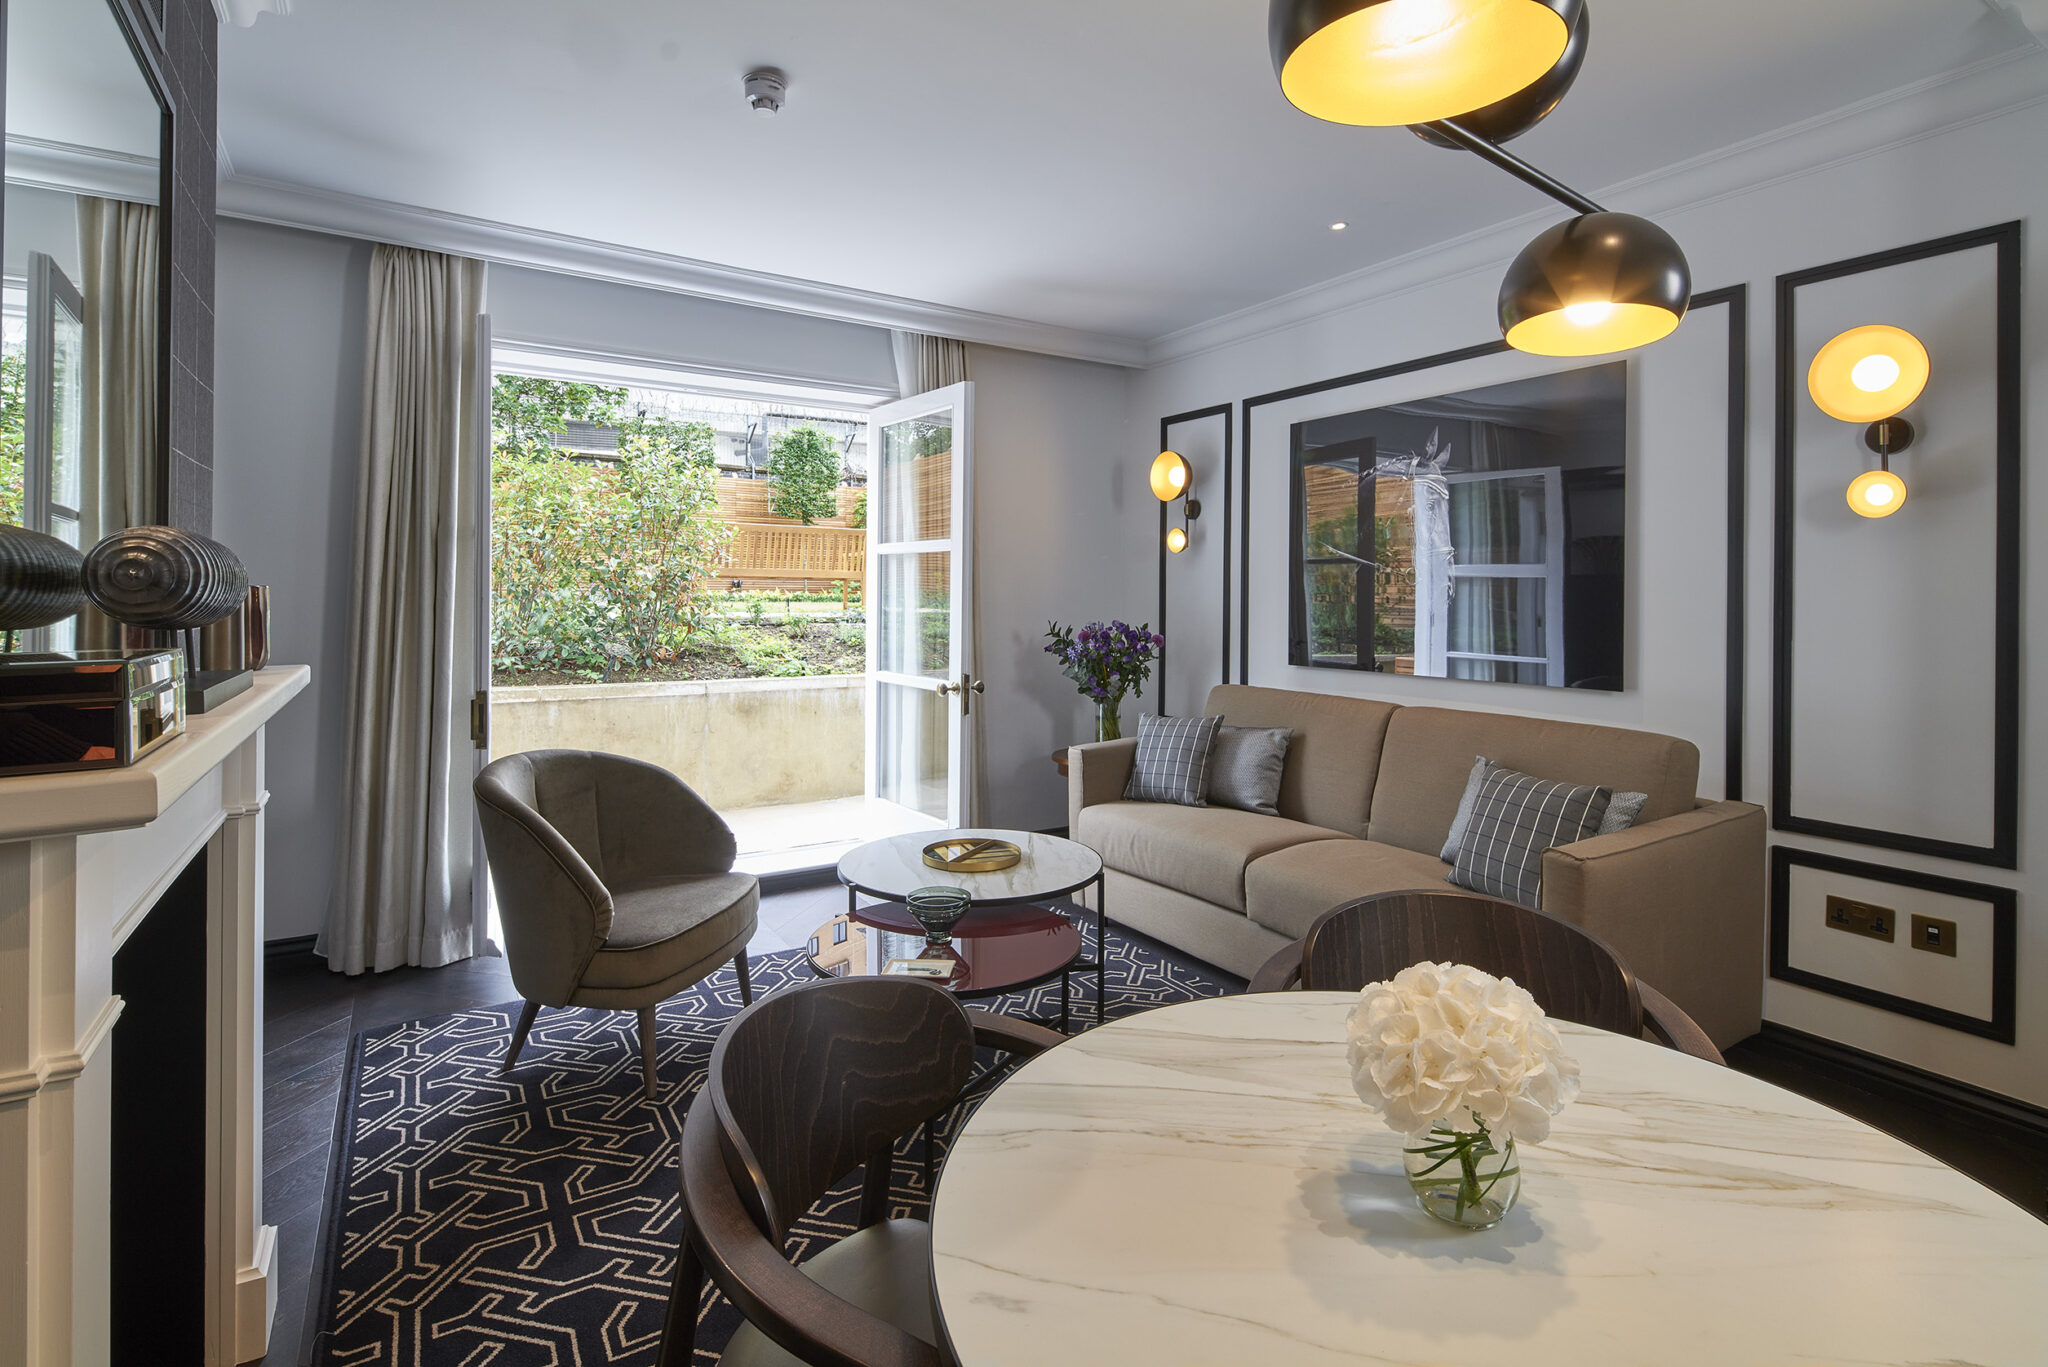 Looking-for-Luxury-Accommodation-Kensington?-Our-Lexham-Gardens-Luxury-Serviced-Apartments-in-Central-London-are-available-now-for-short-lets!-urban-Stay